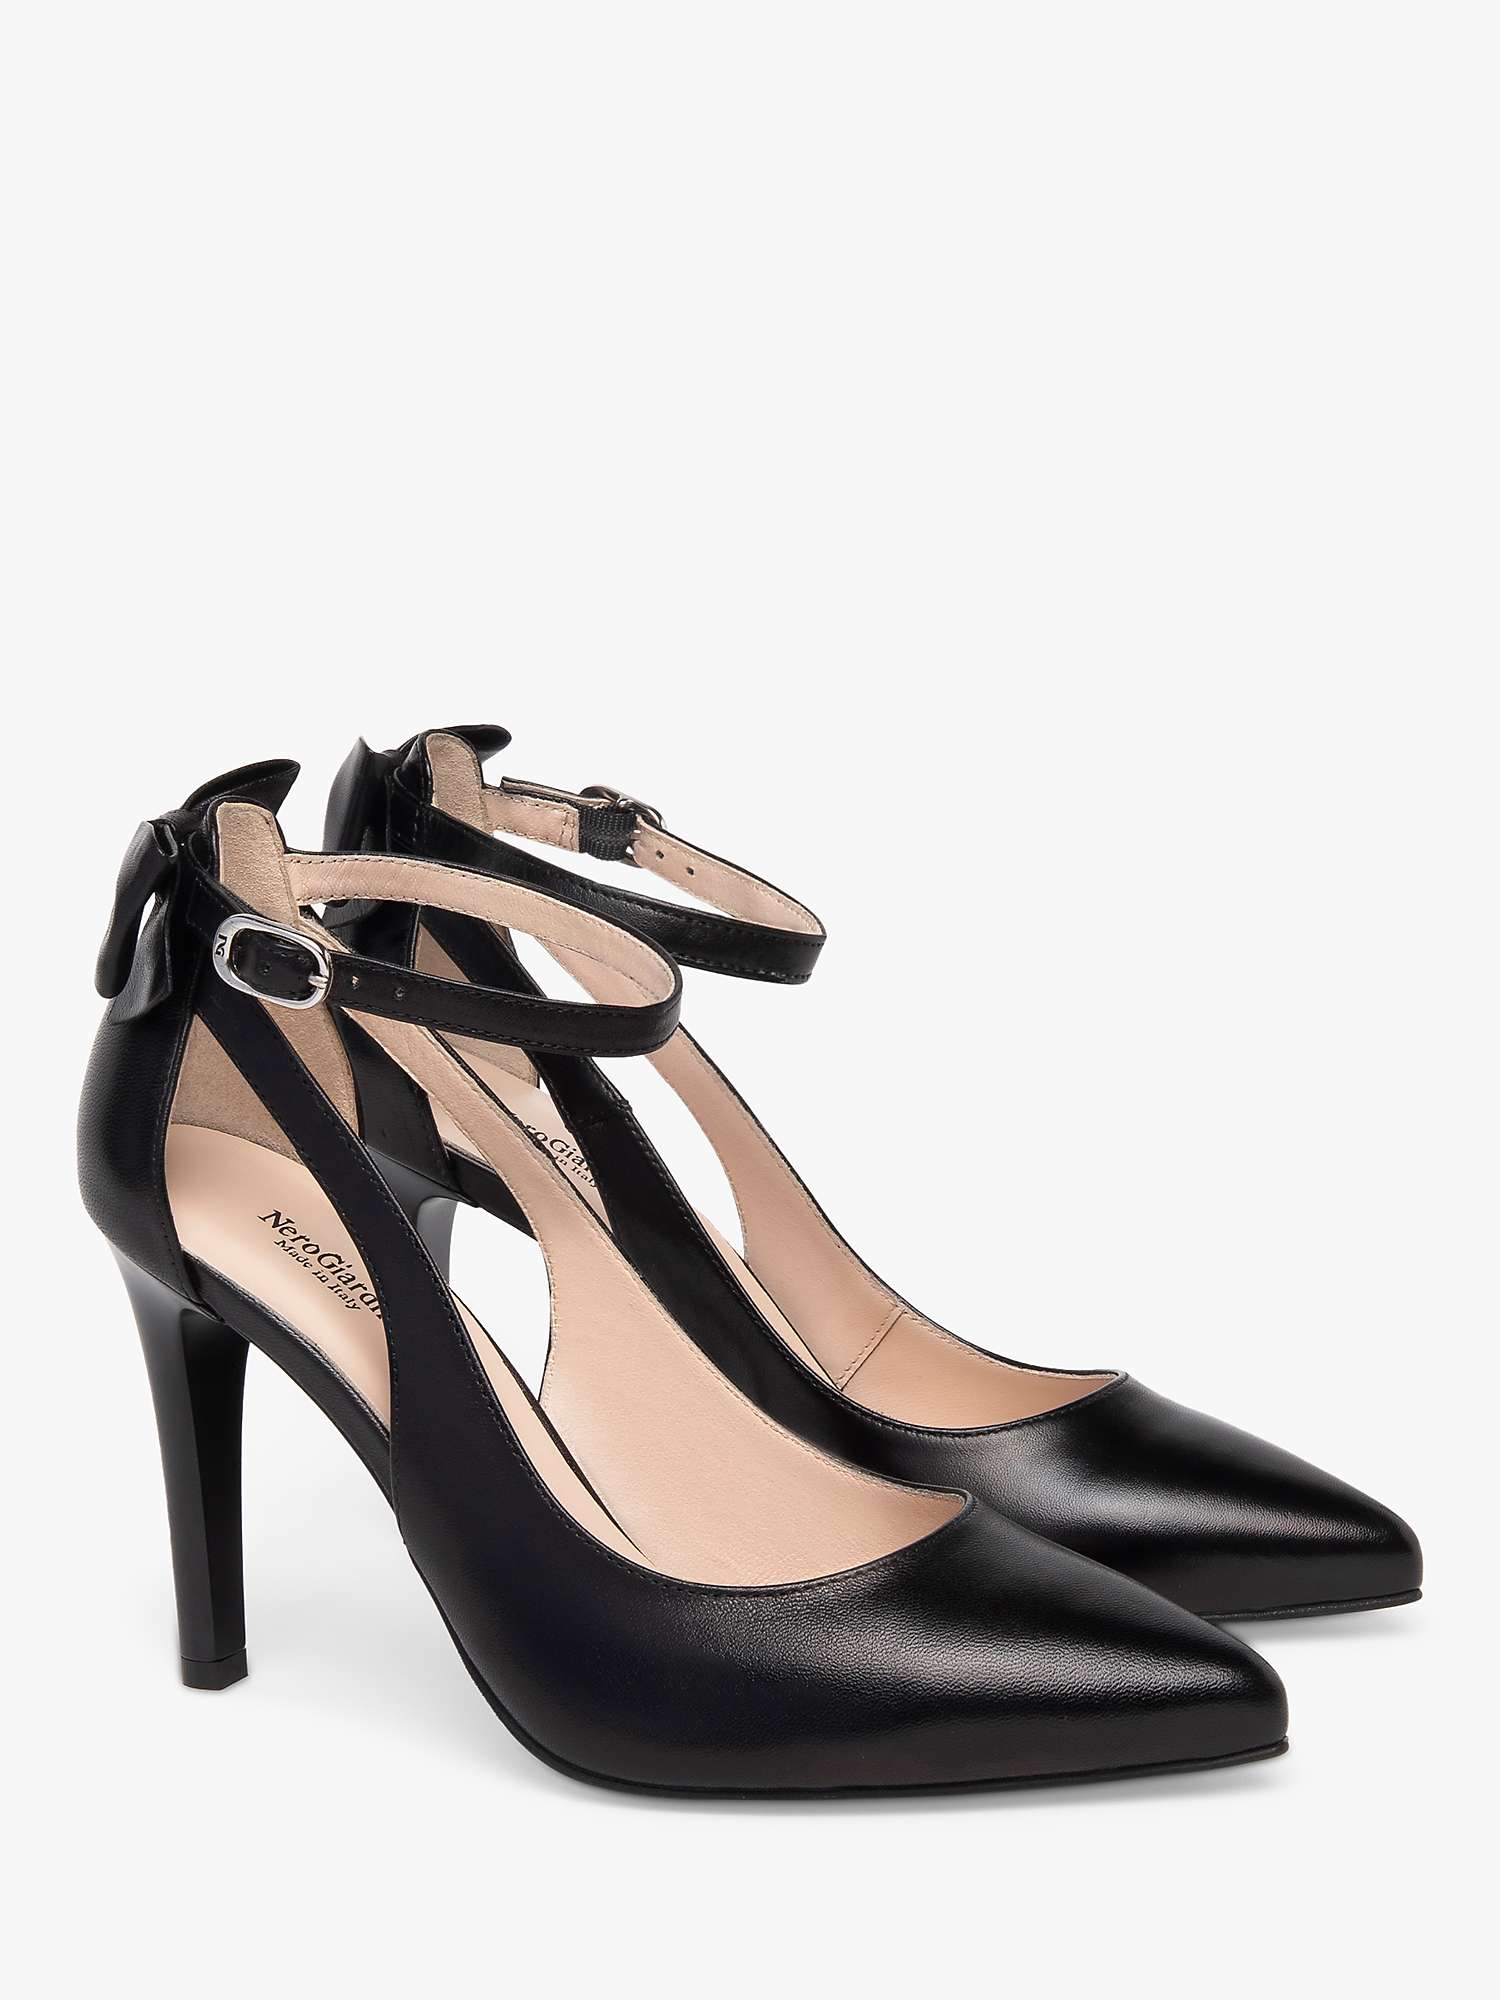 Buy NeroGiardini Leather Bow Court Shoes, Black Online at johnlewis.com